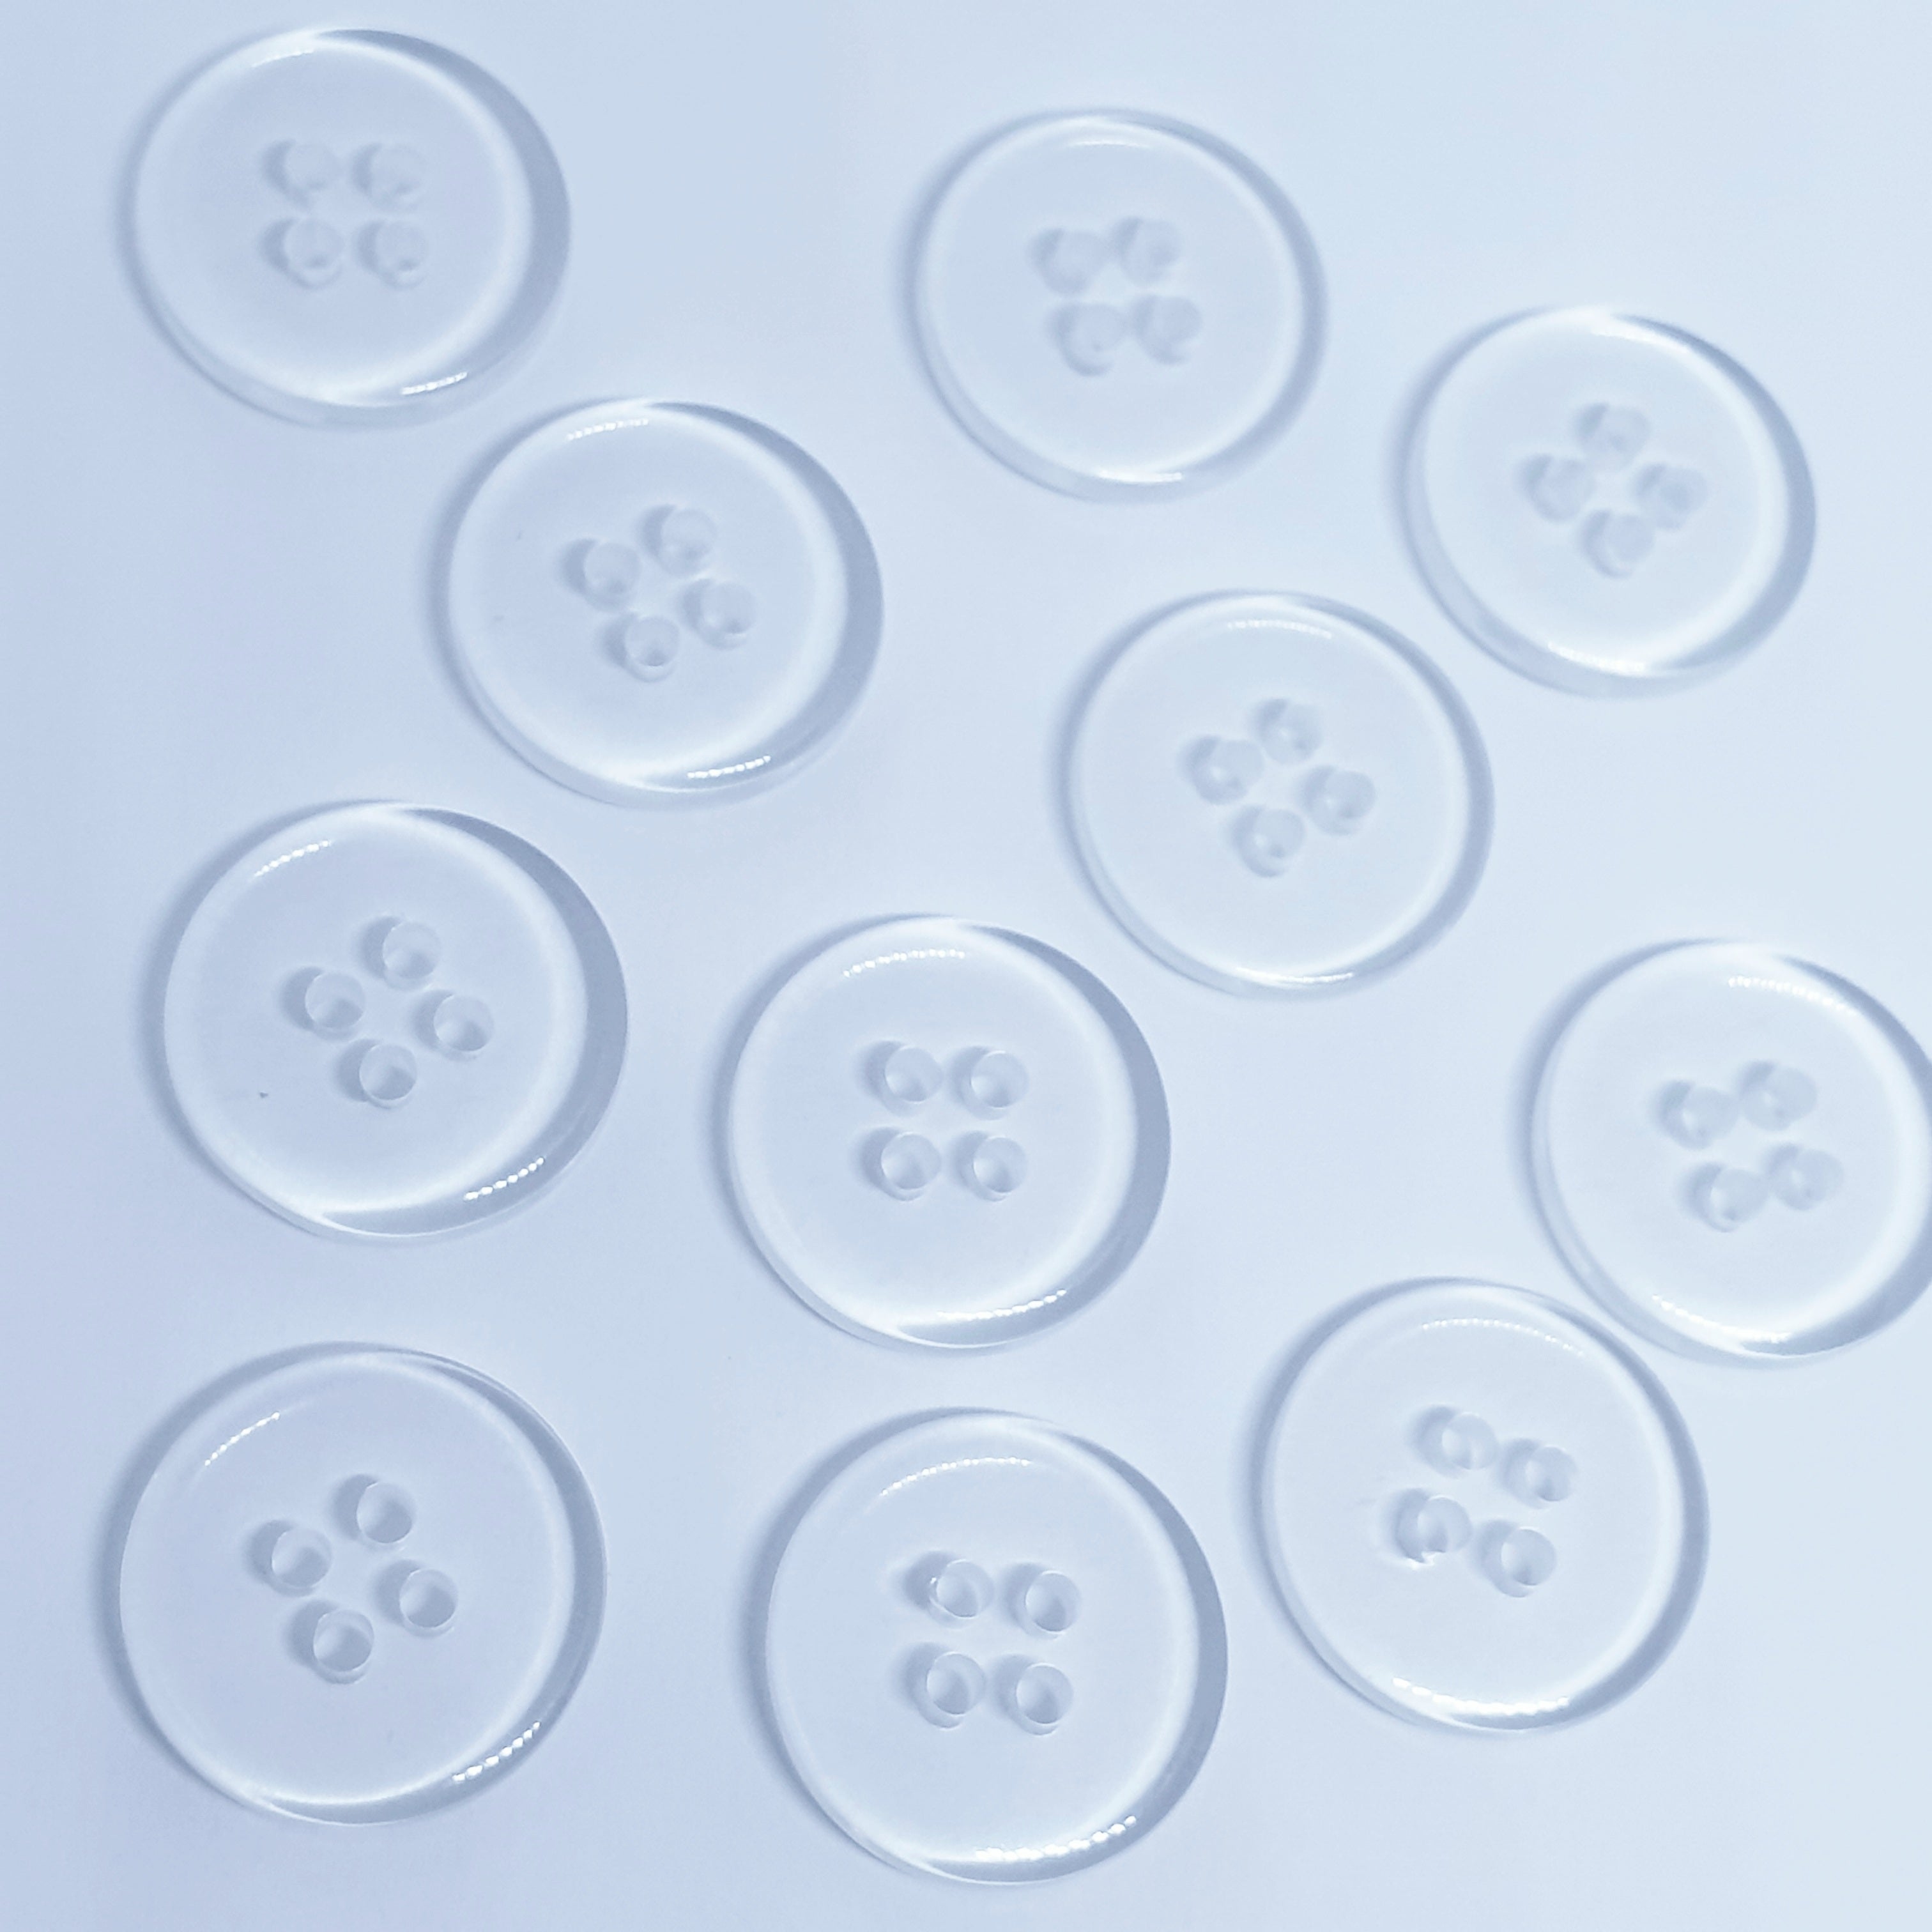 MajorCrafts 50pcs 18mm Transparent Clear 4 Holes Round Resin Sewing Buttons